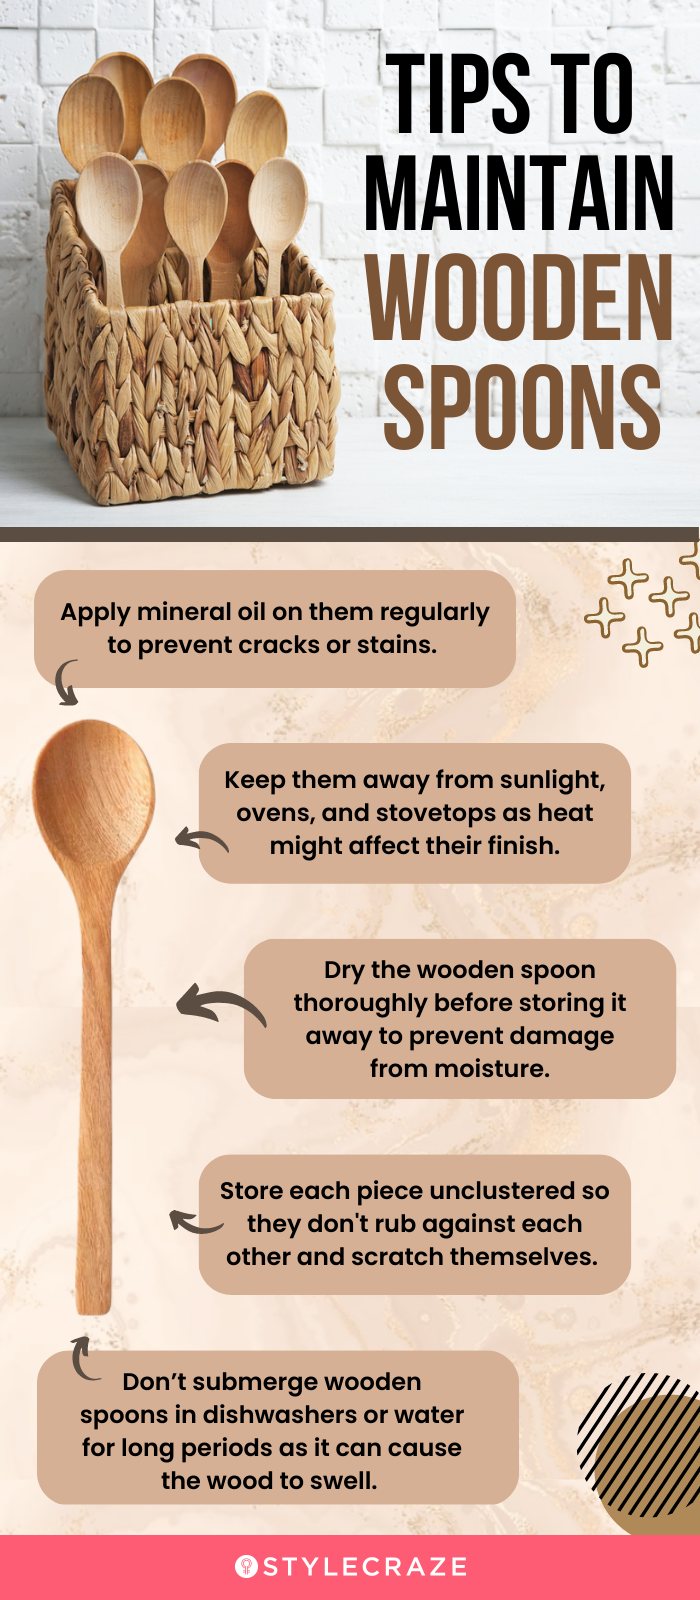 Tips To Maintain Wooden Spoons (infographic)